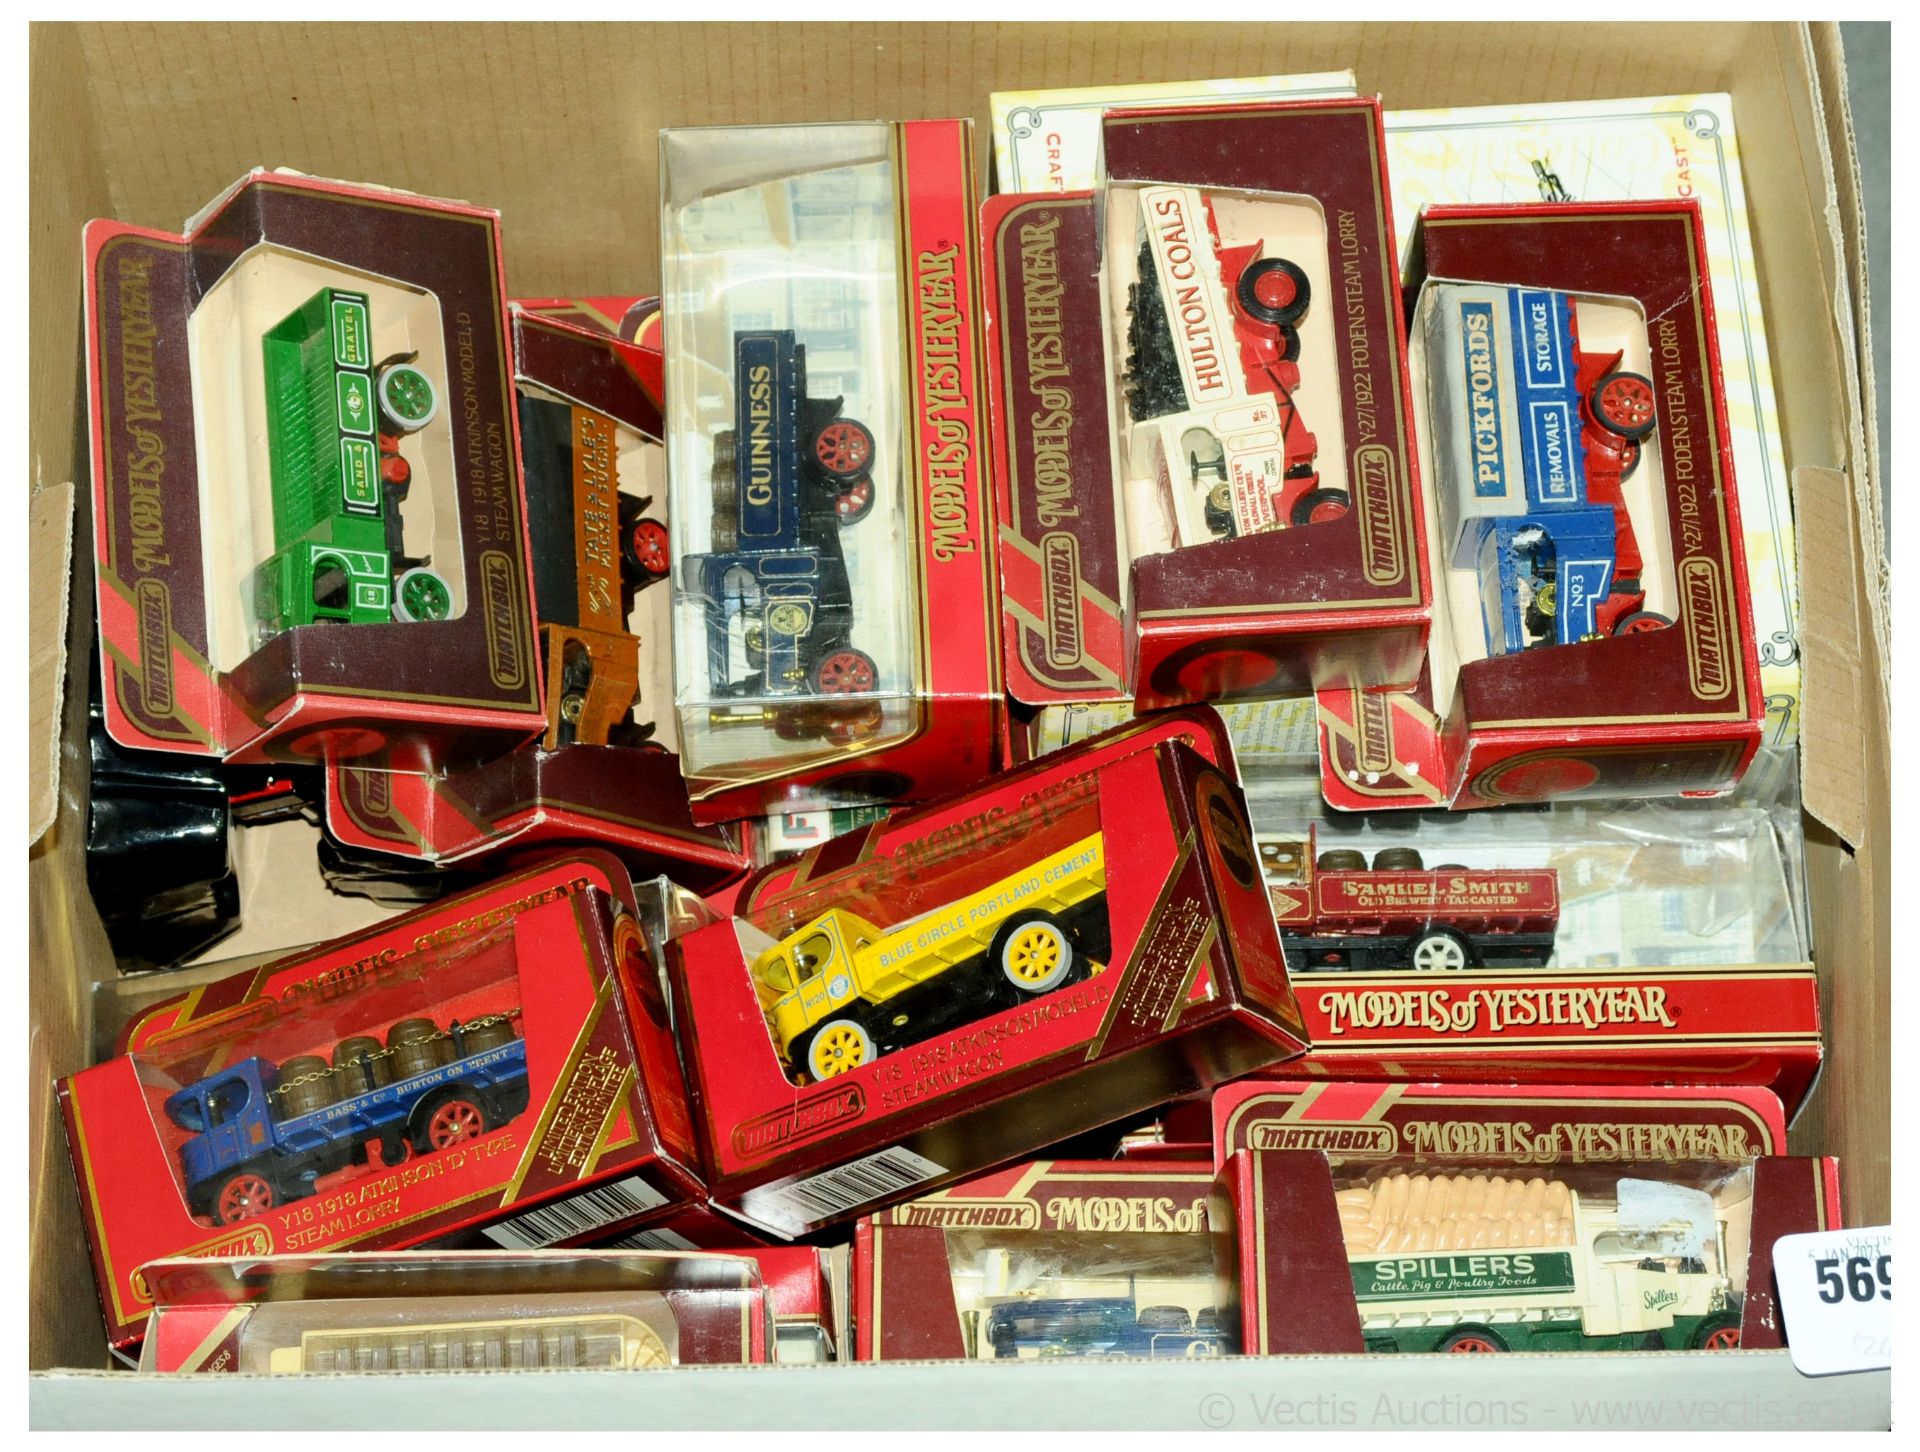 GRP inc Matchbox Models of Yesteryear Commercial